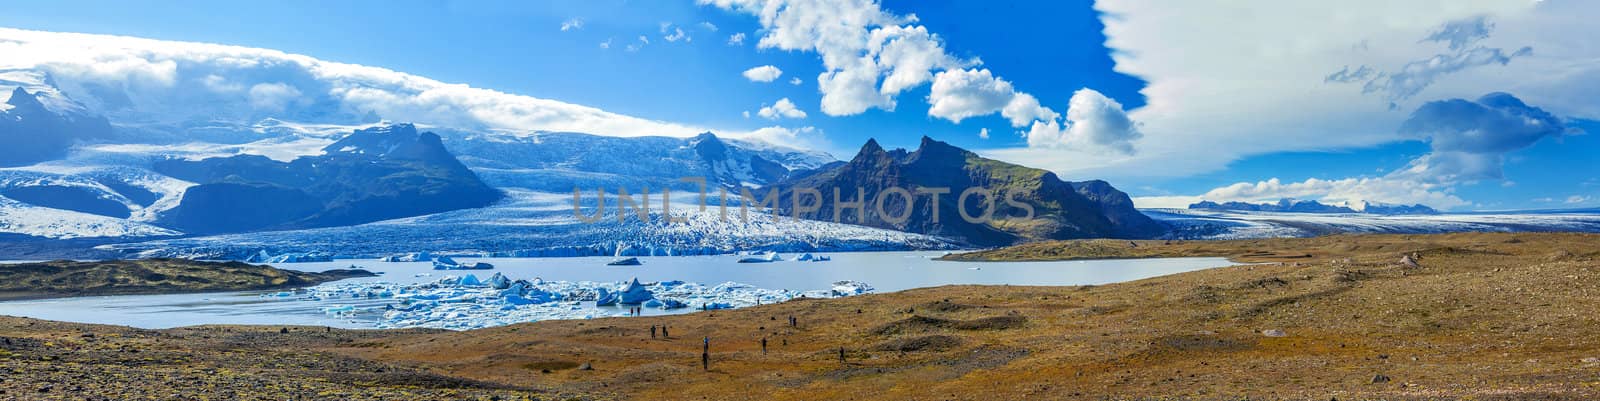 Panorama of Glacial Lagoon Fjalls�rl�n Iceland. Shot during the summer this is the biggest glacier Vatnajokull in Europe and is in the Skaftafell National Park.